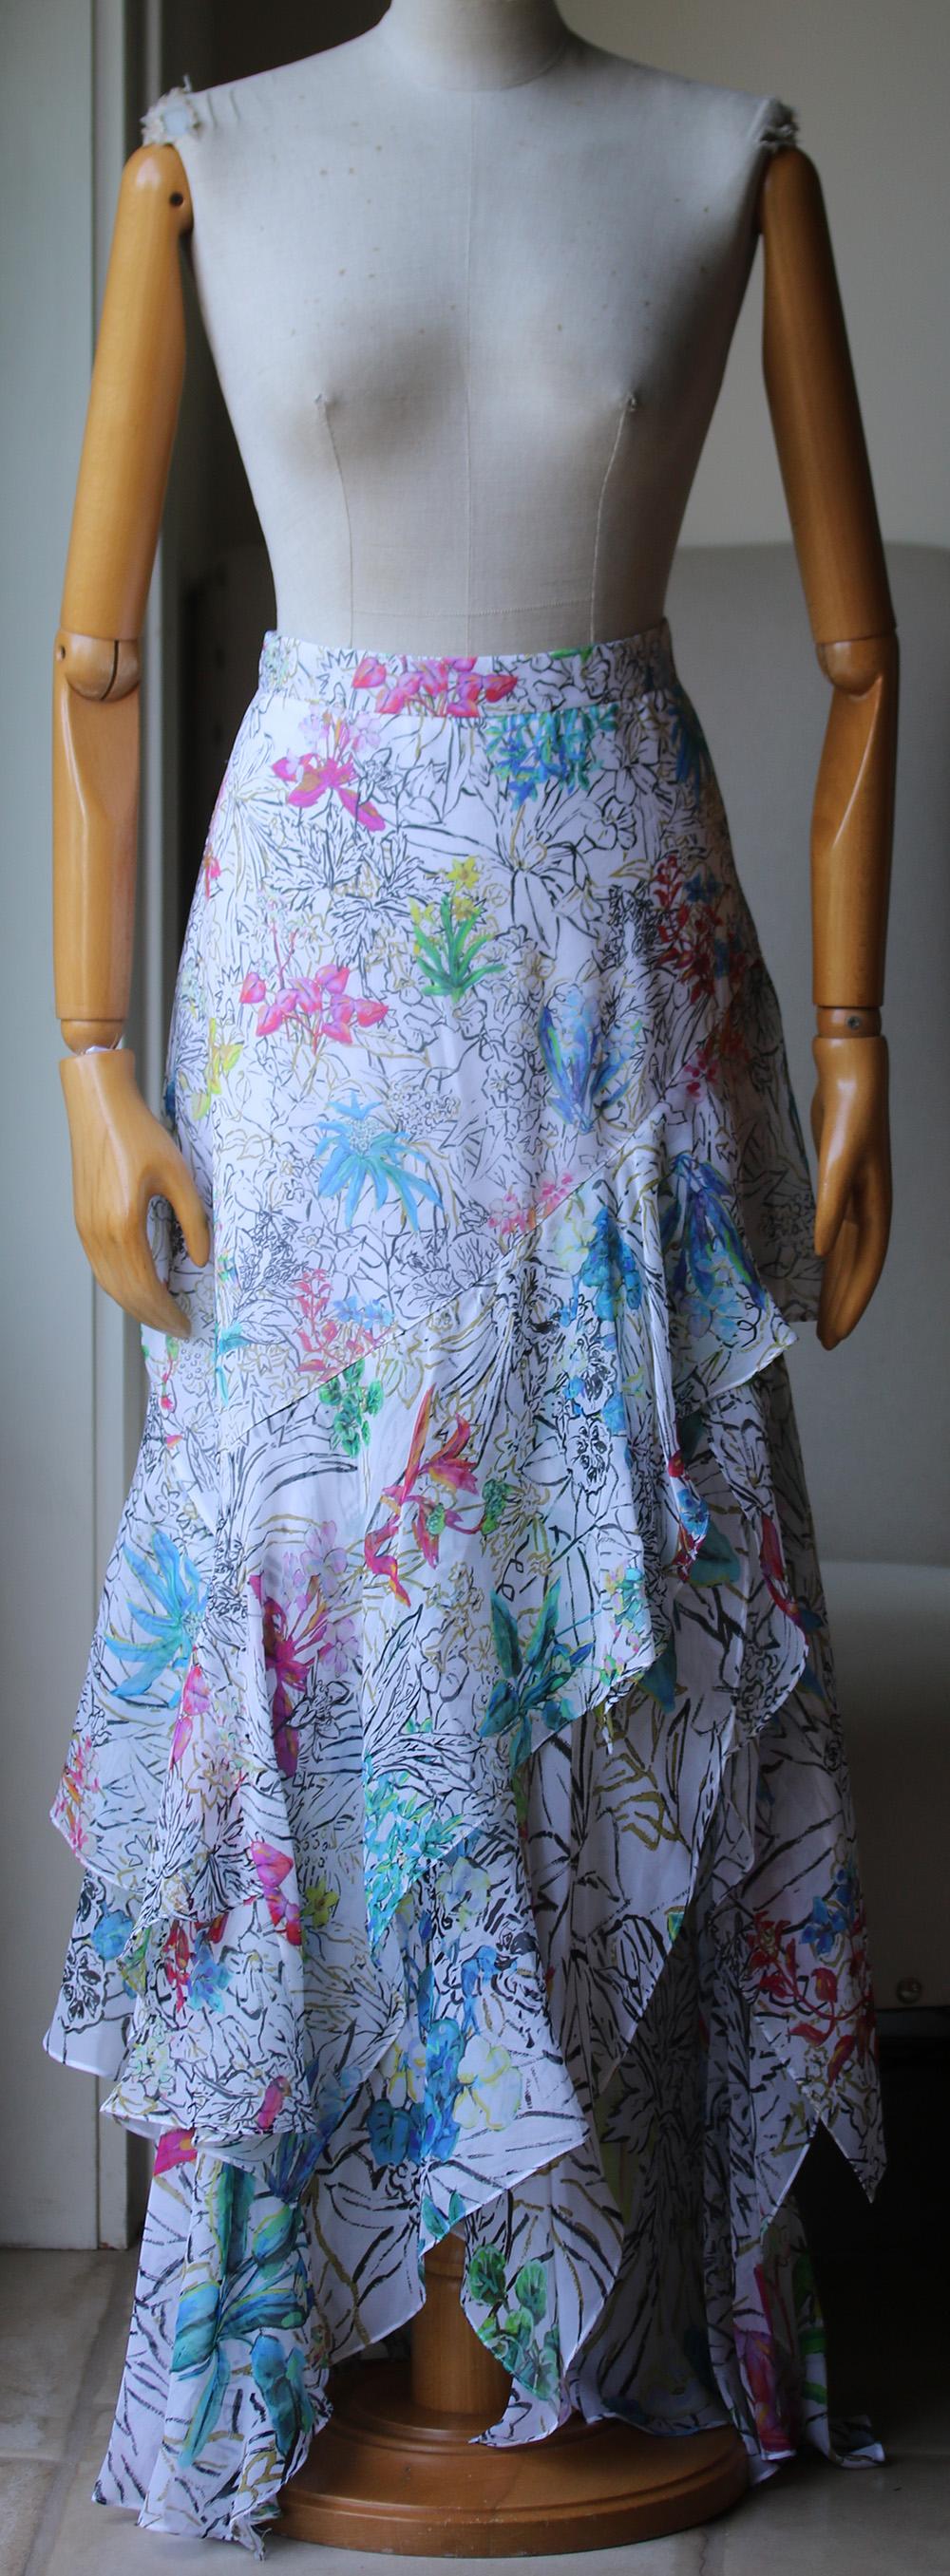 Ankle length. Printed. Silk-georgette. Ruffled. Concealed zip fastening along back. Fully lined. Asymmetric slit. 100% Silk.

Size: UK 12 (US 8, FR 40, IT 44)

Condition: As new condition, no sign of wear.